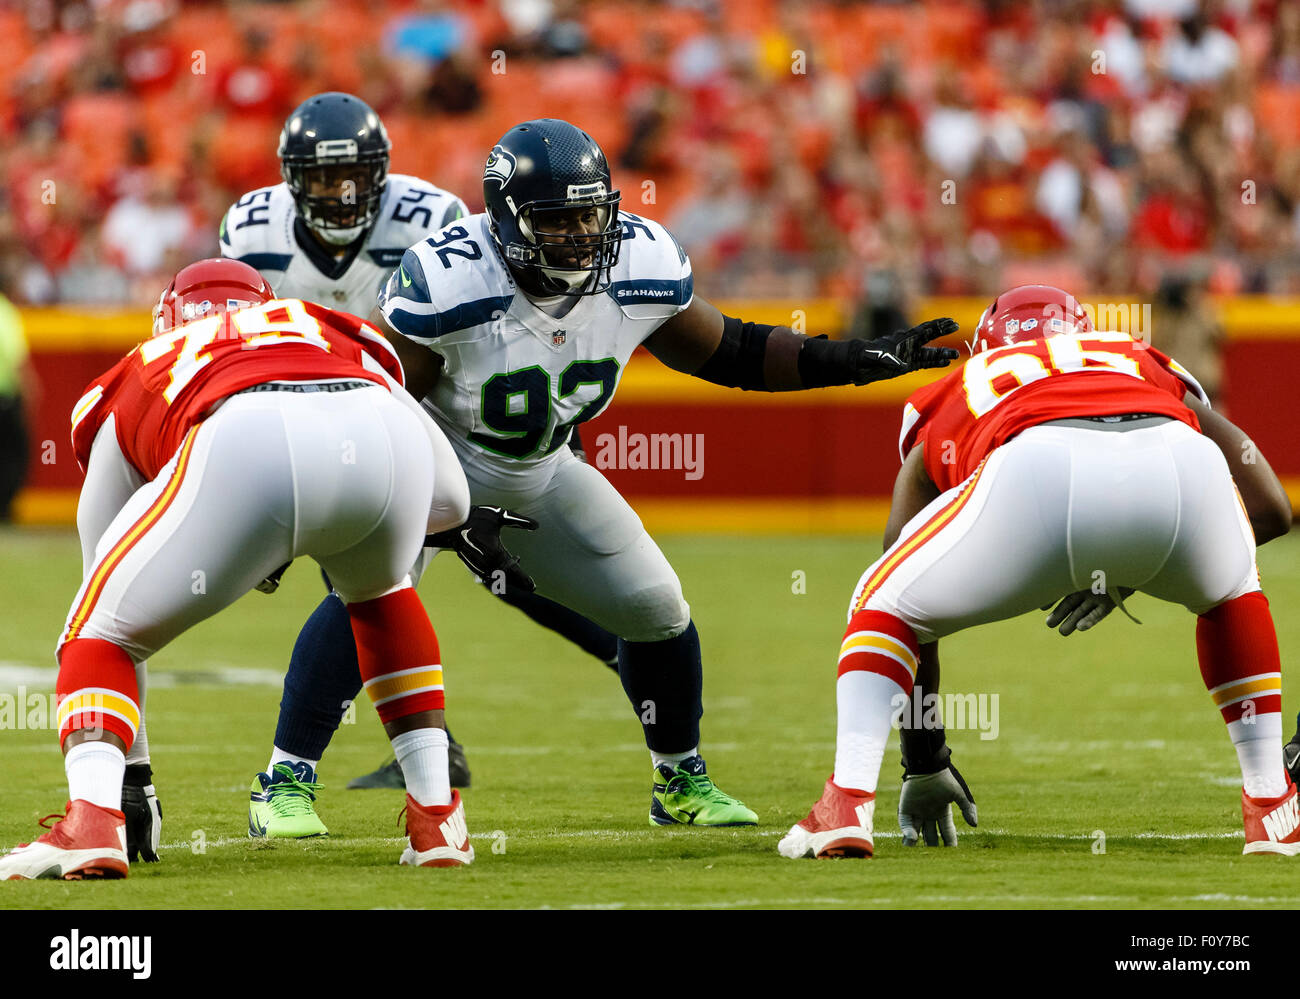 August 21, 2015: Seattle Seahawks defensive tackle Brandon Mebane (92) on the line of scrimmage during the NFL preseason game between the Seattle Seahawks and the Kansas City Chiefs at Arrowhead Stadium in Kansas City, MO Tim Warner/CSM. Stock Photo